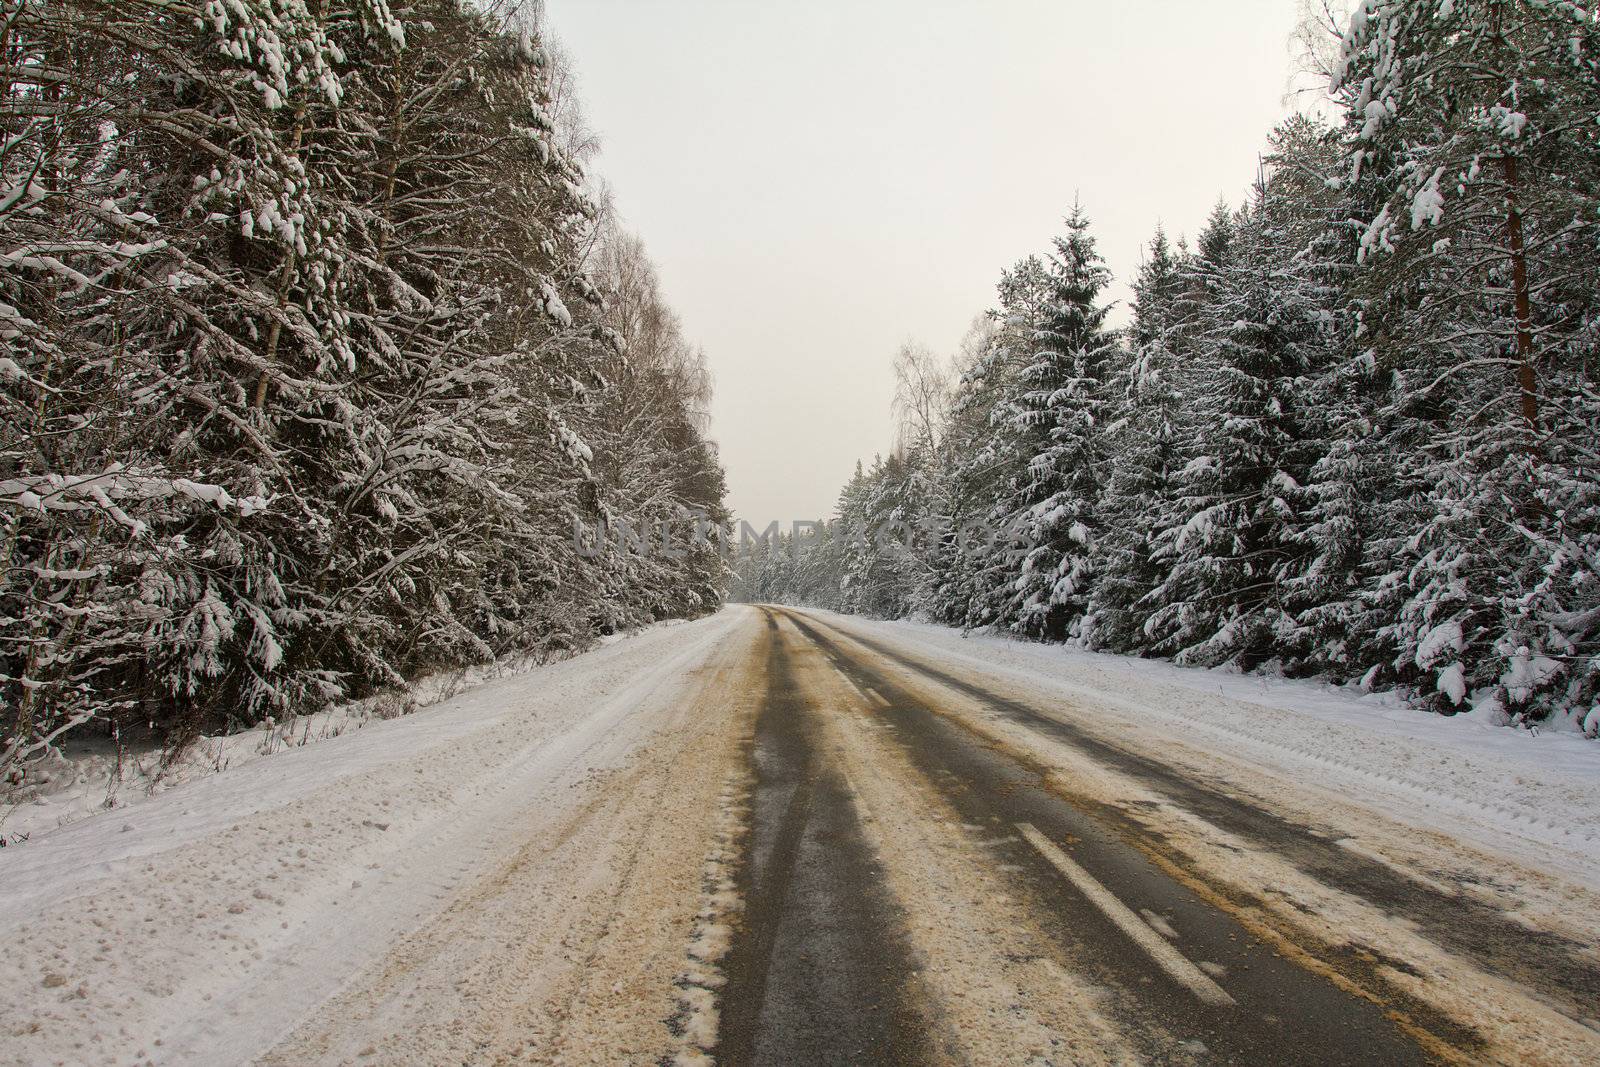 snowy country road in forest